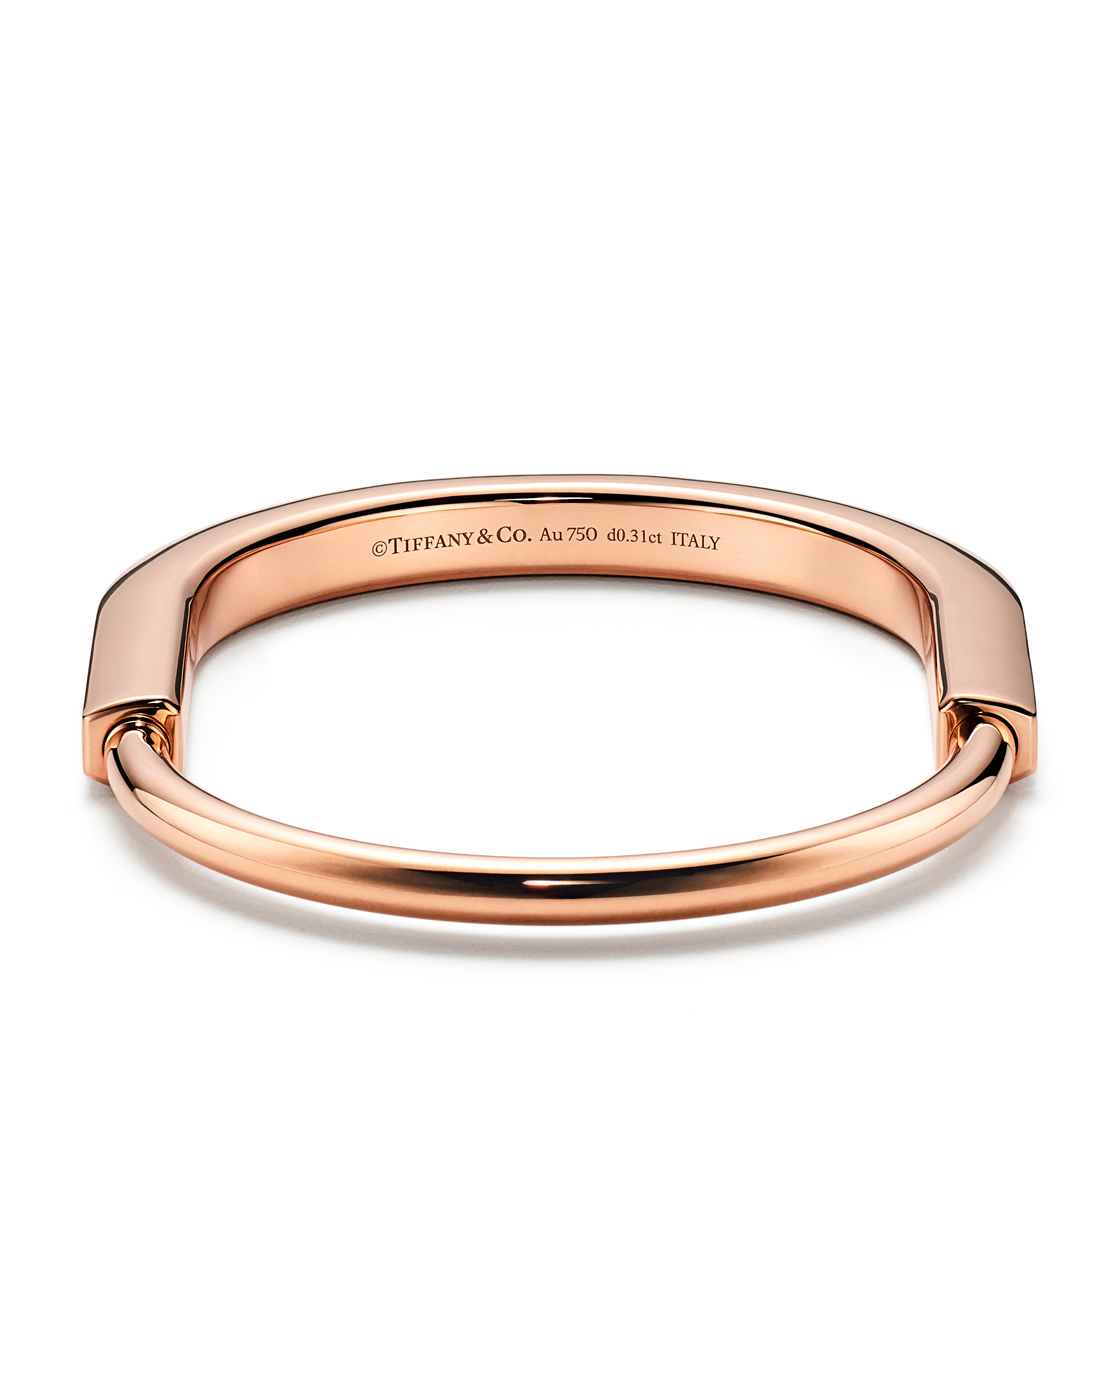 The New Tiffany Lock Bracelet Collection Debuts With a Padlock